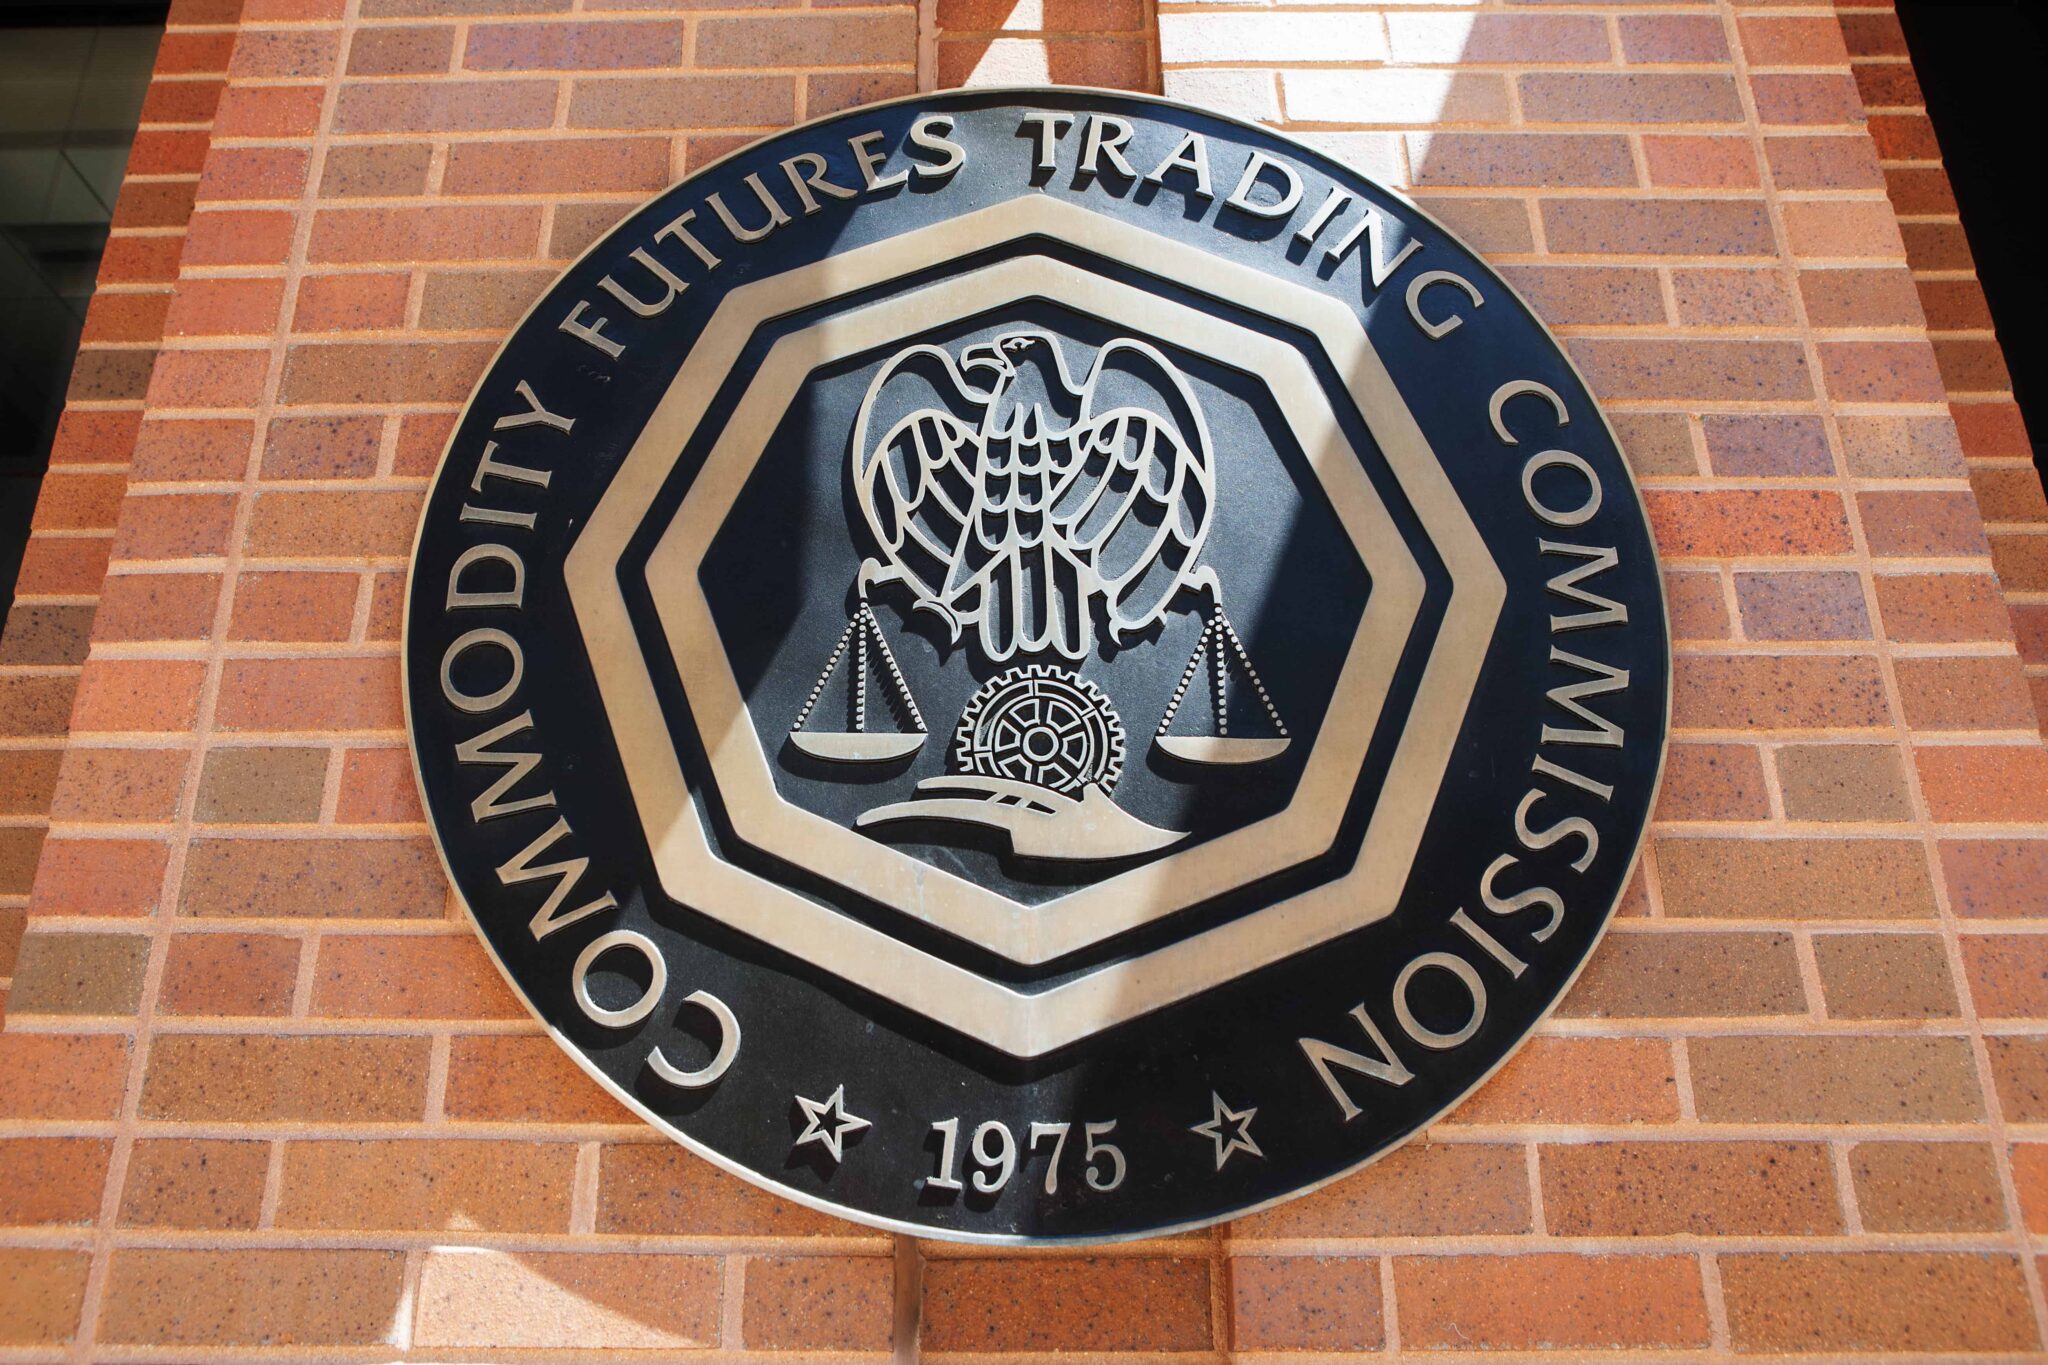 Did the CFTC Chairman Behnam Admit Regulatory Laws are Outdated?